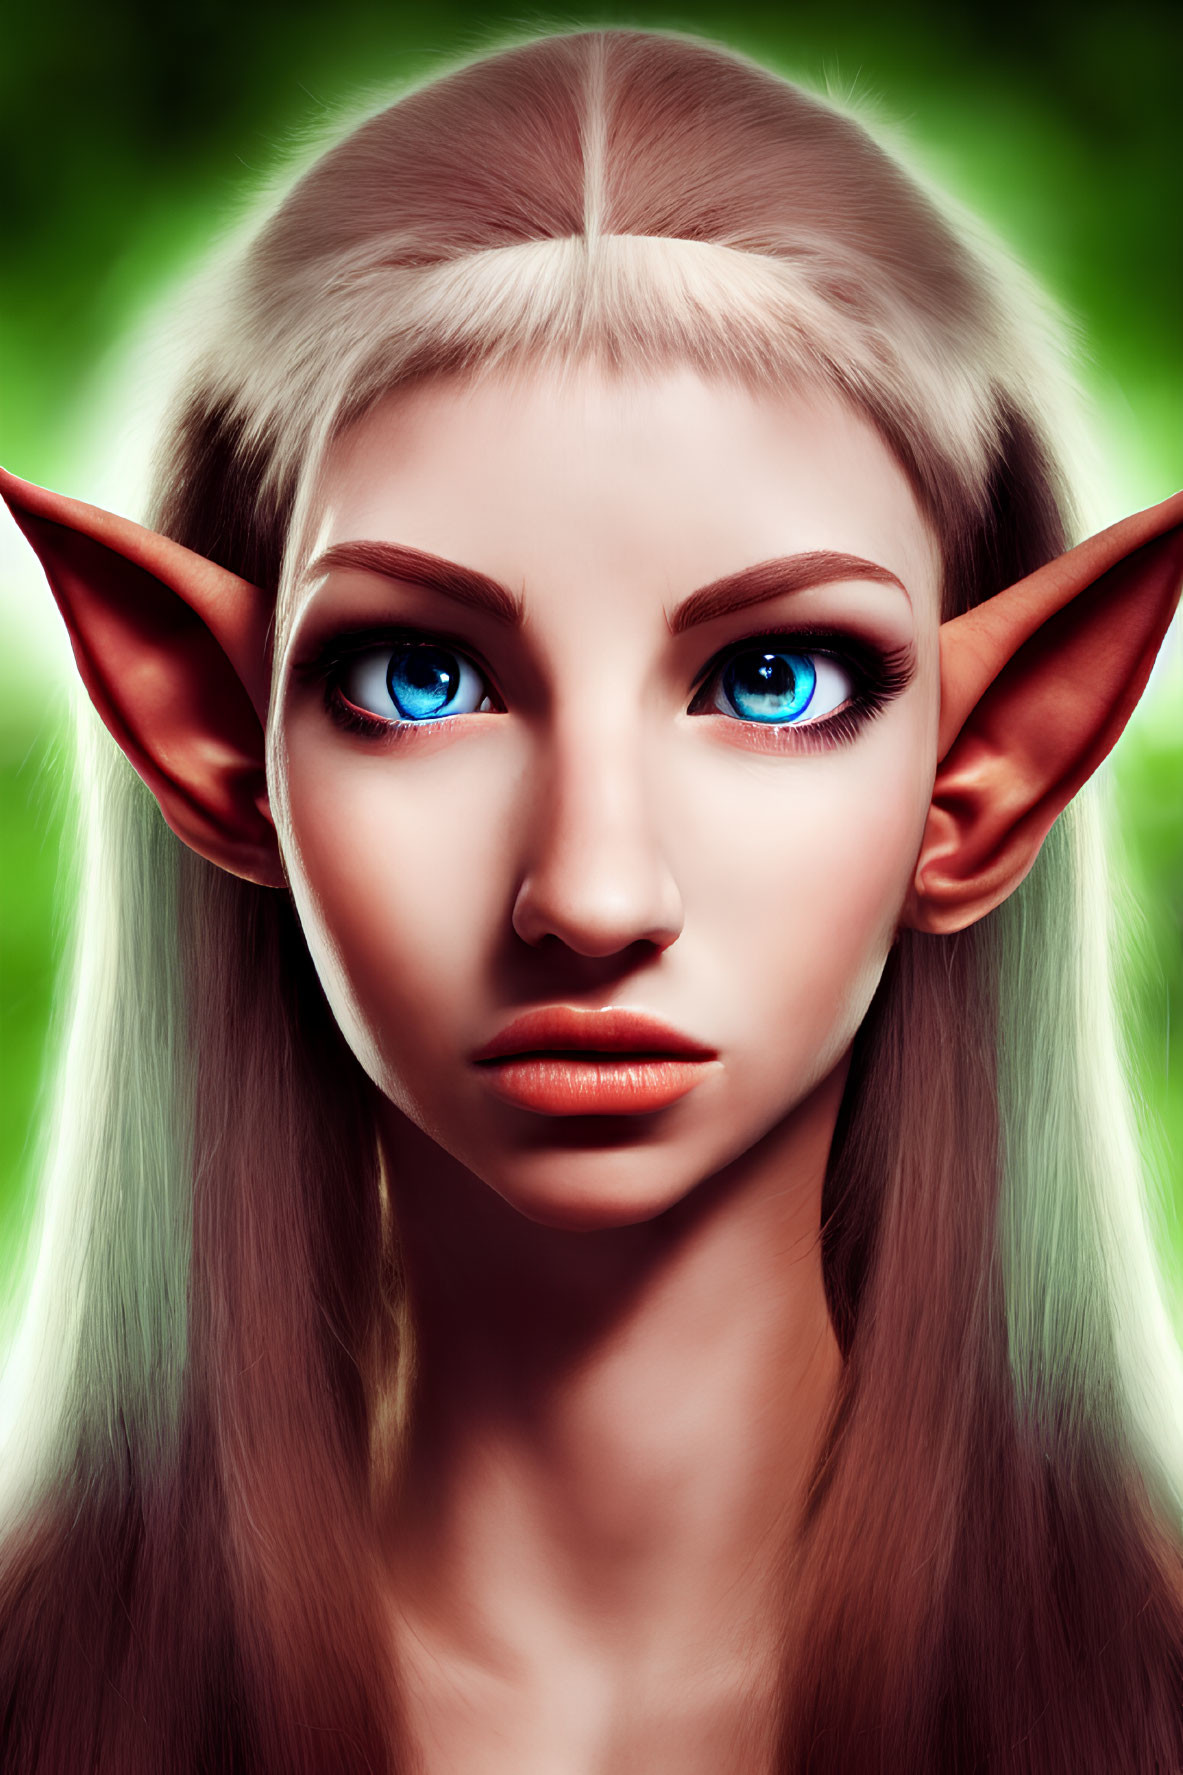 Female Elf Portrait with Pointed Ears and Blue Eyes on Green Background